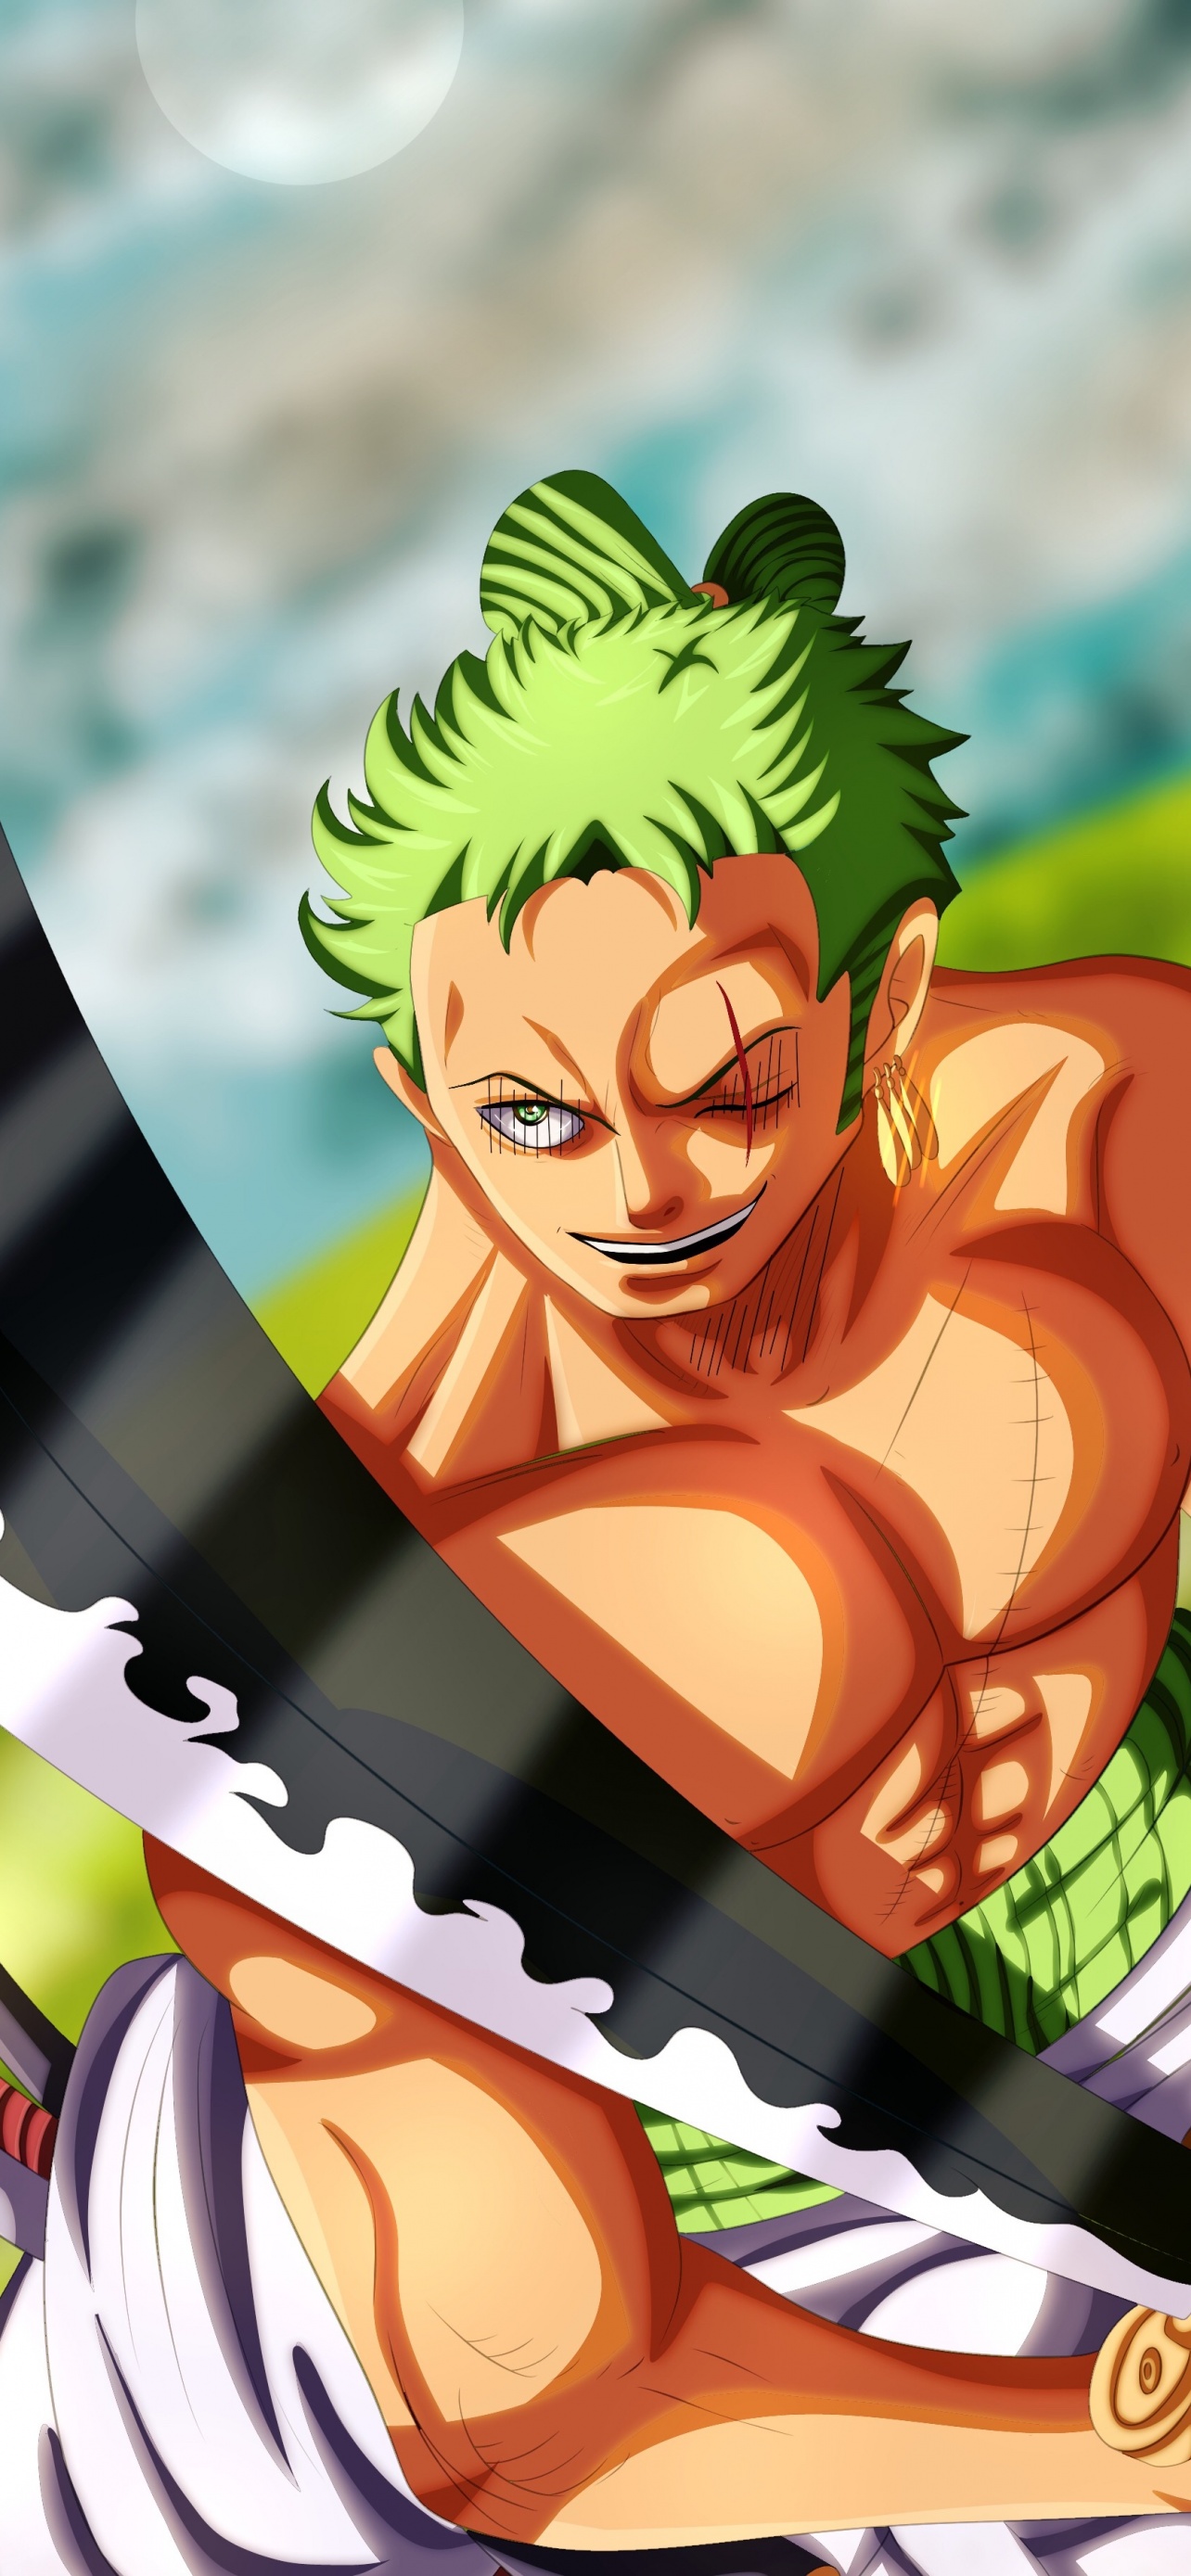 46 Roronoa Zoro Wallpapers for iPhone and Android by Lee White